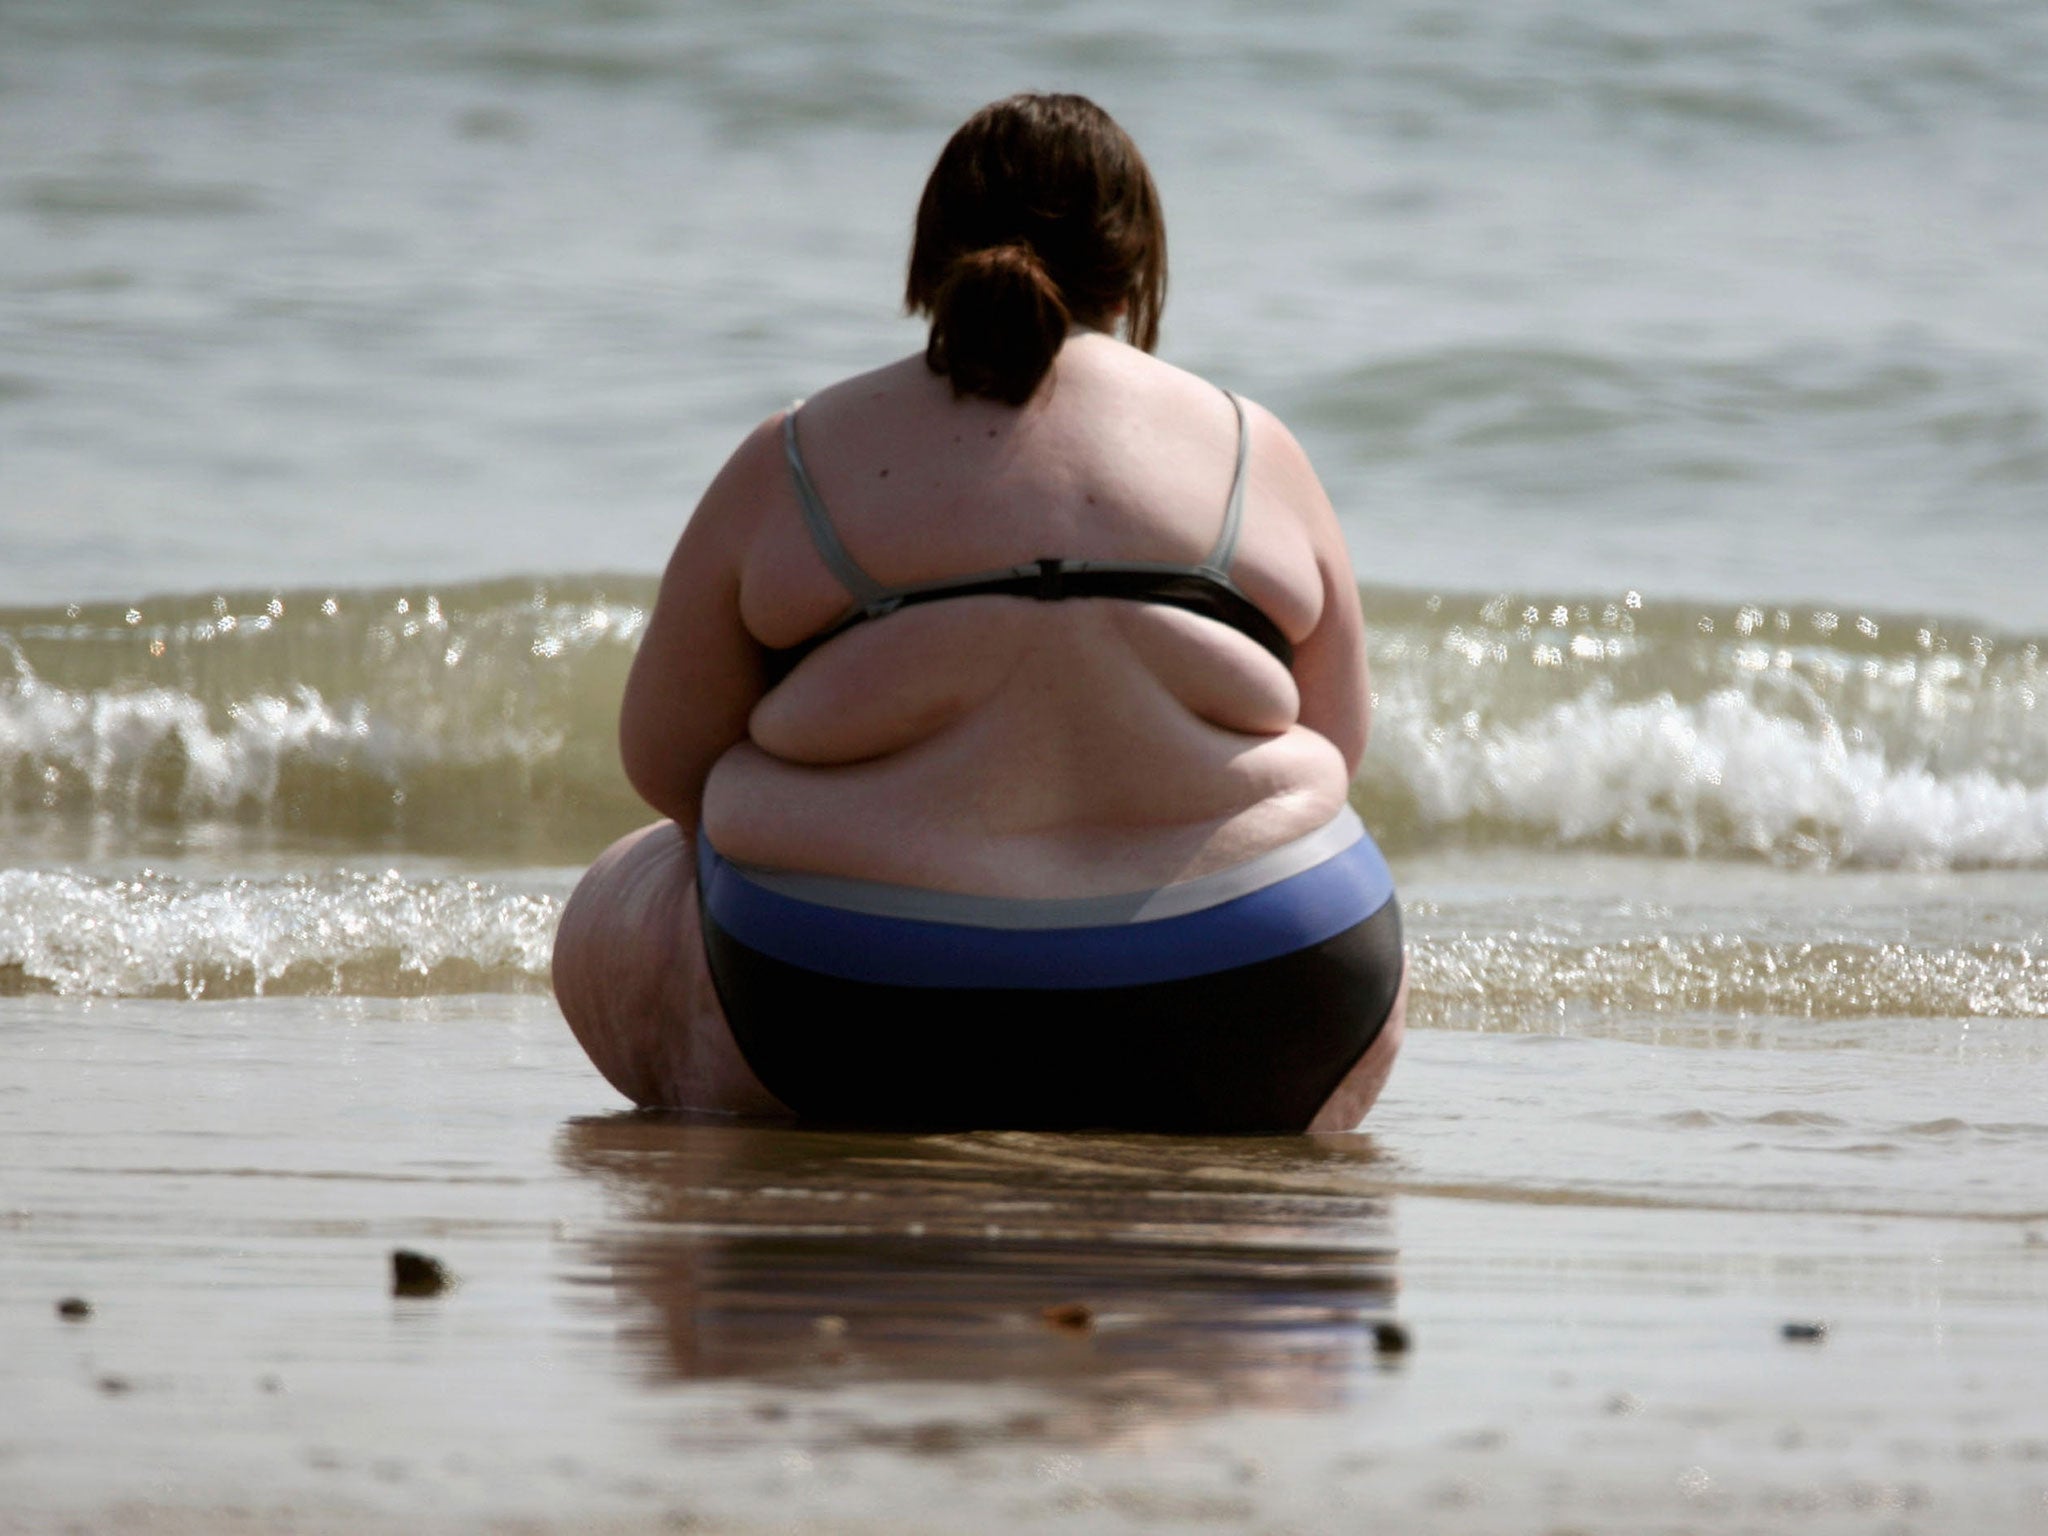 Psychologist Dr Witt said that people's weight appears to be a critical factor in how they perceive distance